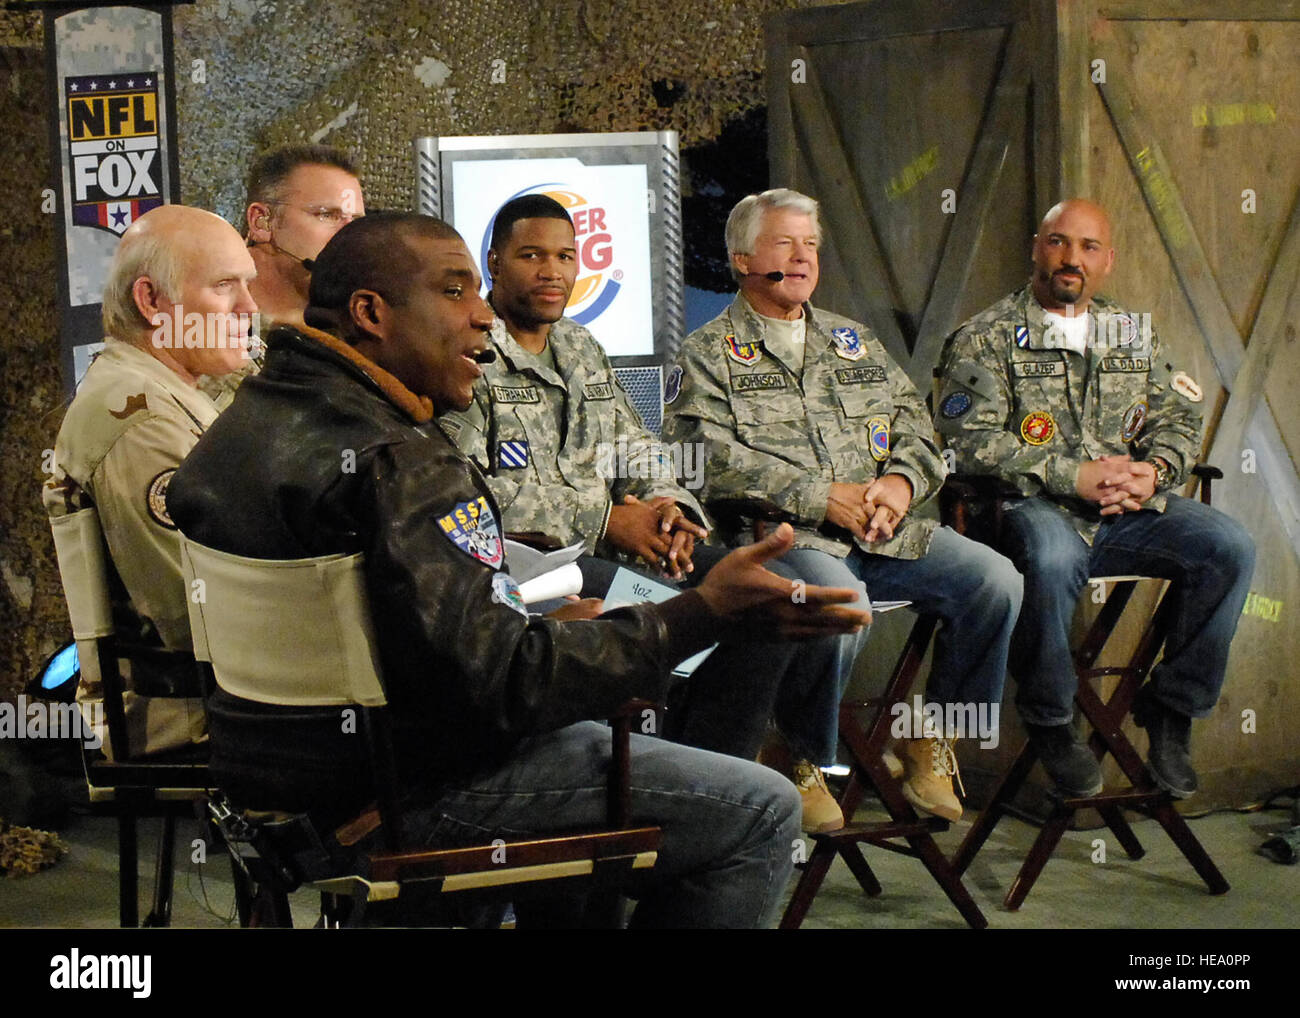 BAGRAM AIR FIELD, Afghanistan -- (From left to right) Curt Menefee, Terry Bradshaw, Howie Long, Michael Strahan, Jimmy Johnson, and Jay Glazer listen to questions during the pregame Nov. 7, 2009. The “Fox NFL Sunday” team came to visit Bagram to boost morale.  They are scheduled to broadcast live Nov. 8, 2009 from here.  Senior Airman Felicia Juenke) Stock Photo